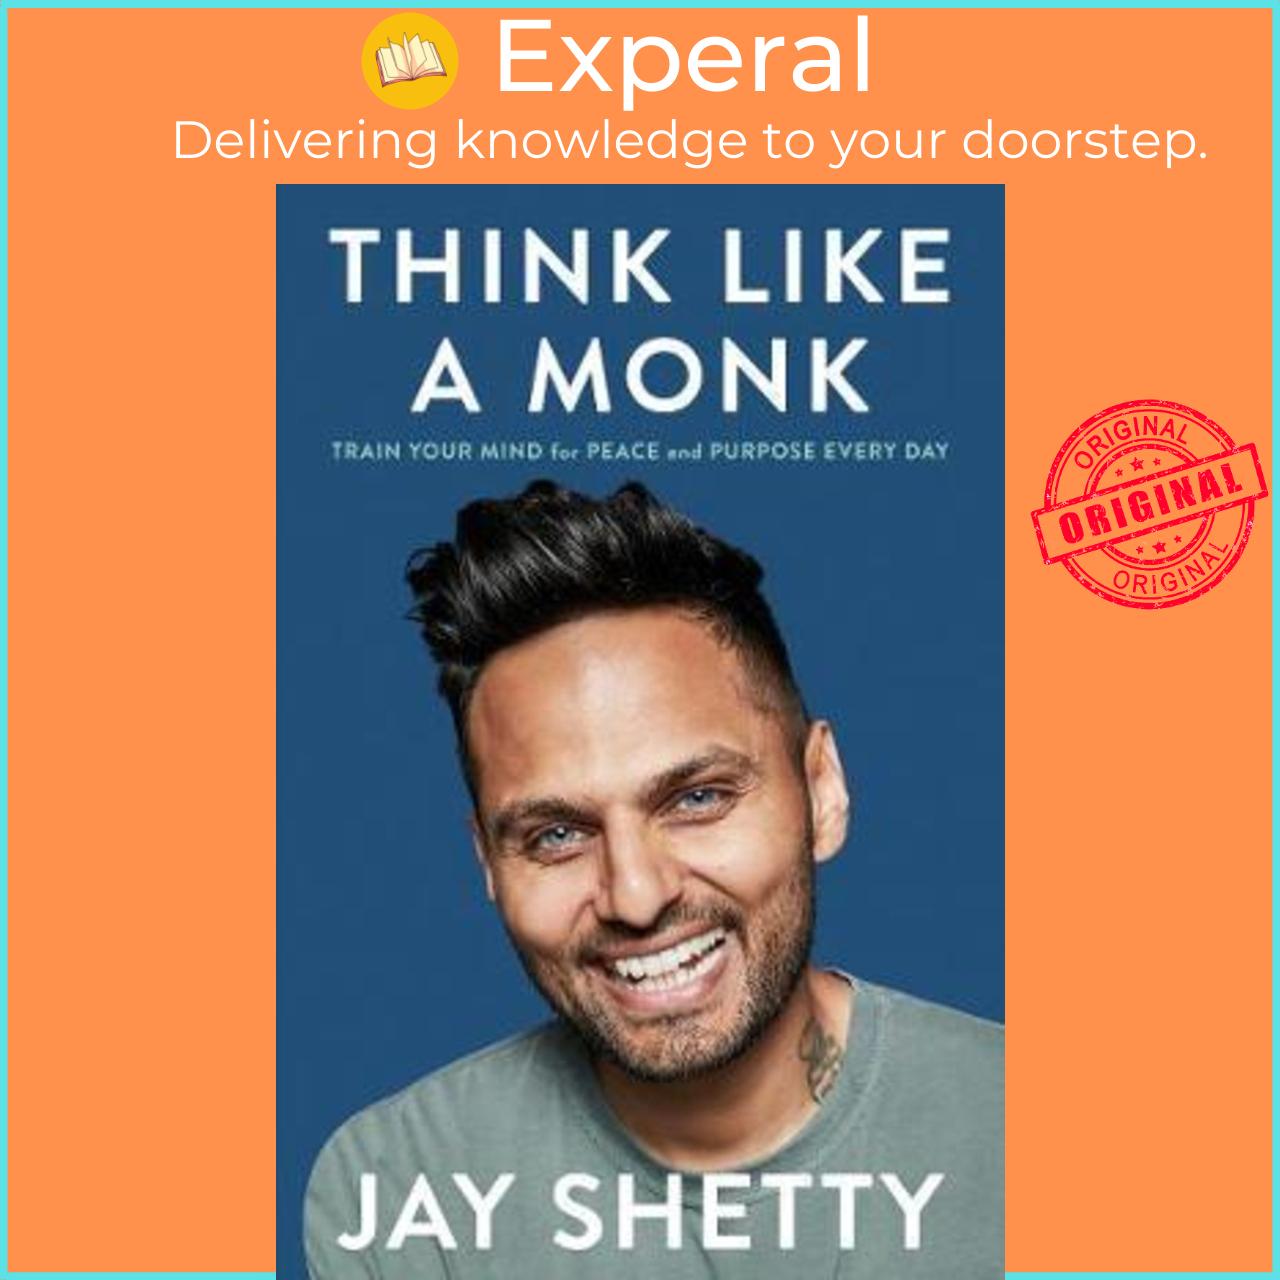 Sách - Think Like a Monk : The Secret of How to Harness the Power of Positivity an by Jay Shetty (UK edition, hardcover)